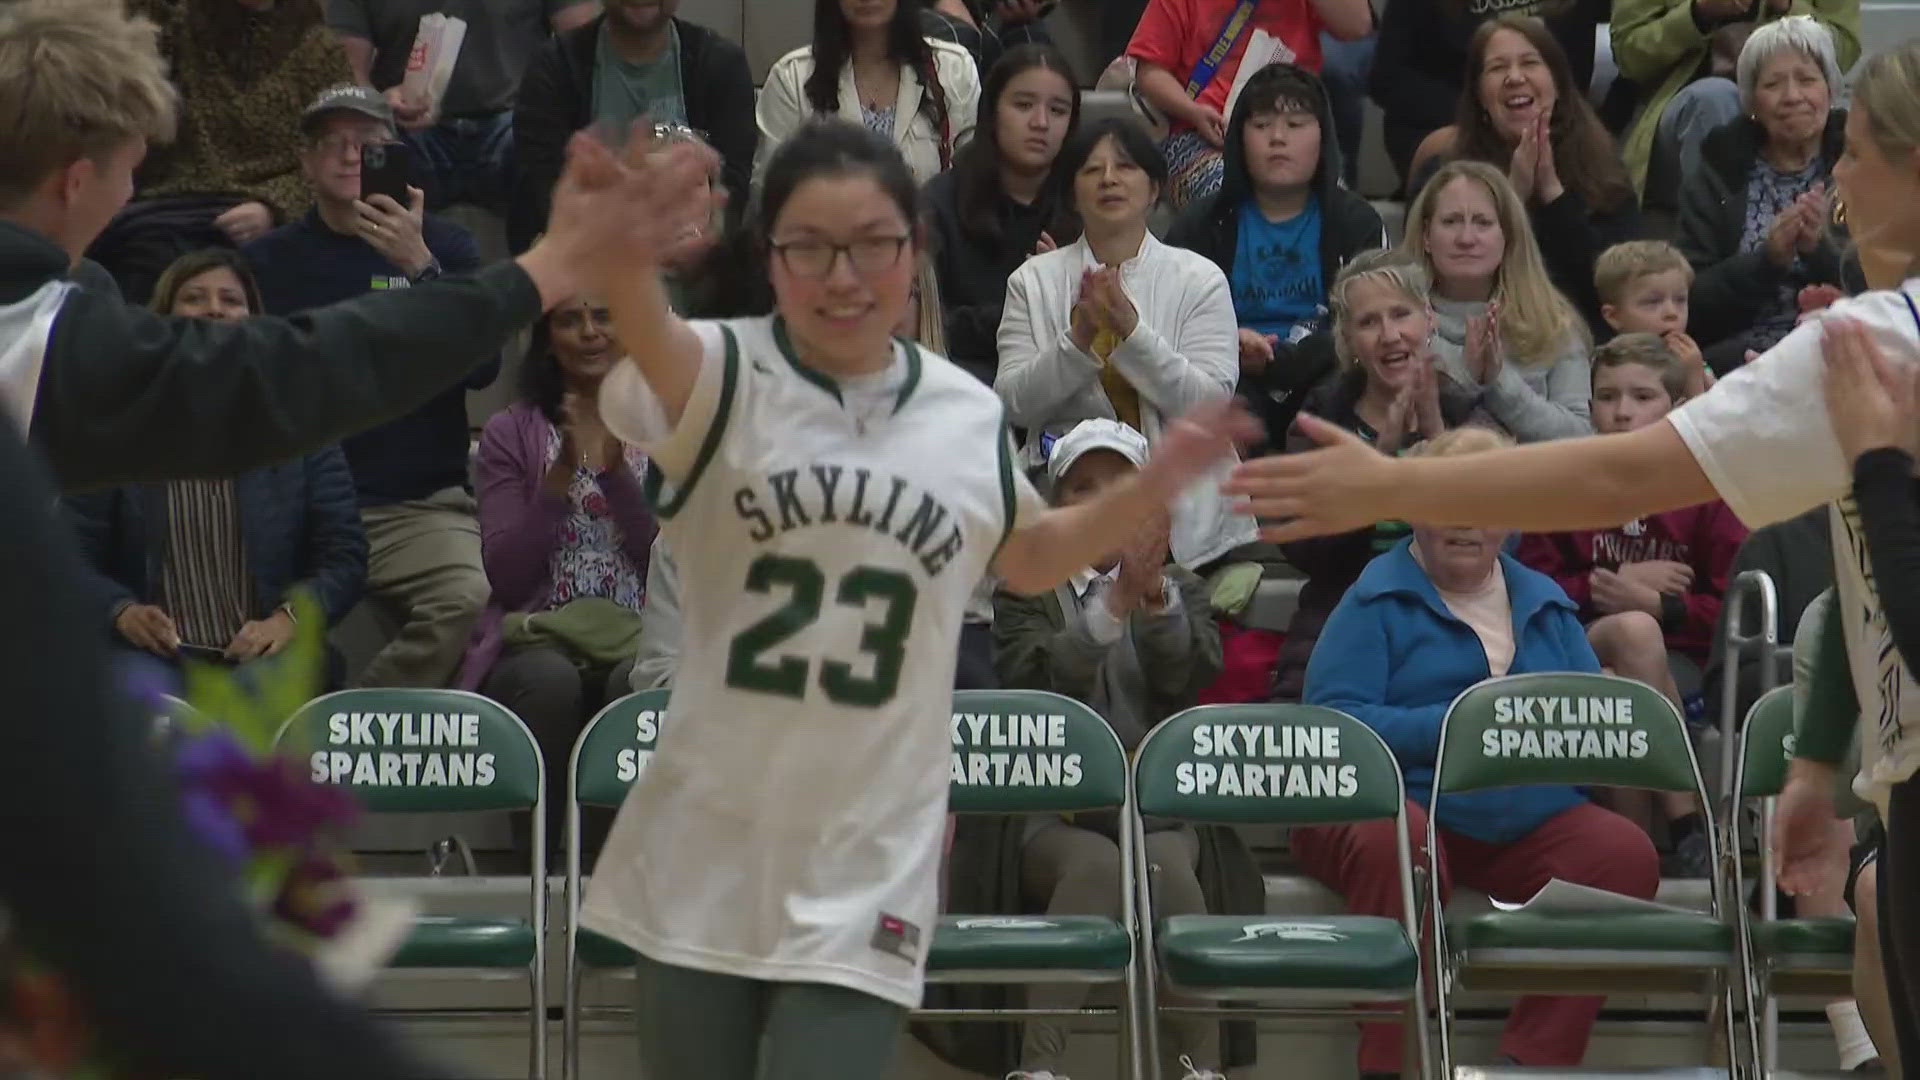 The game gives students with special needs to chance to shine and be cheered on by their classmates.